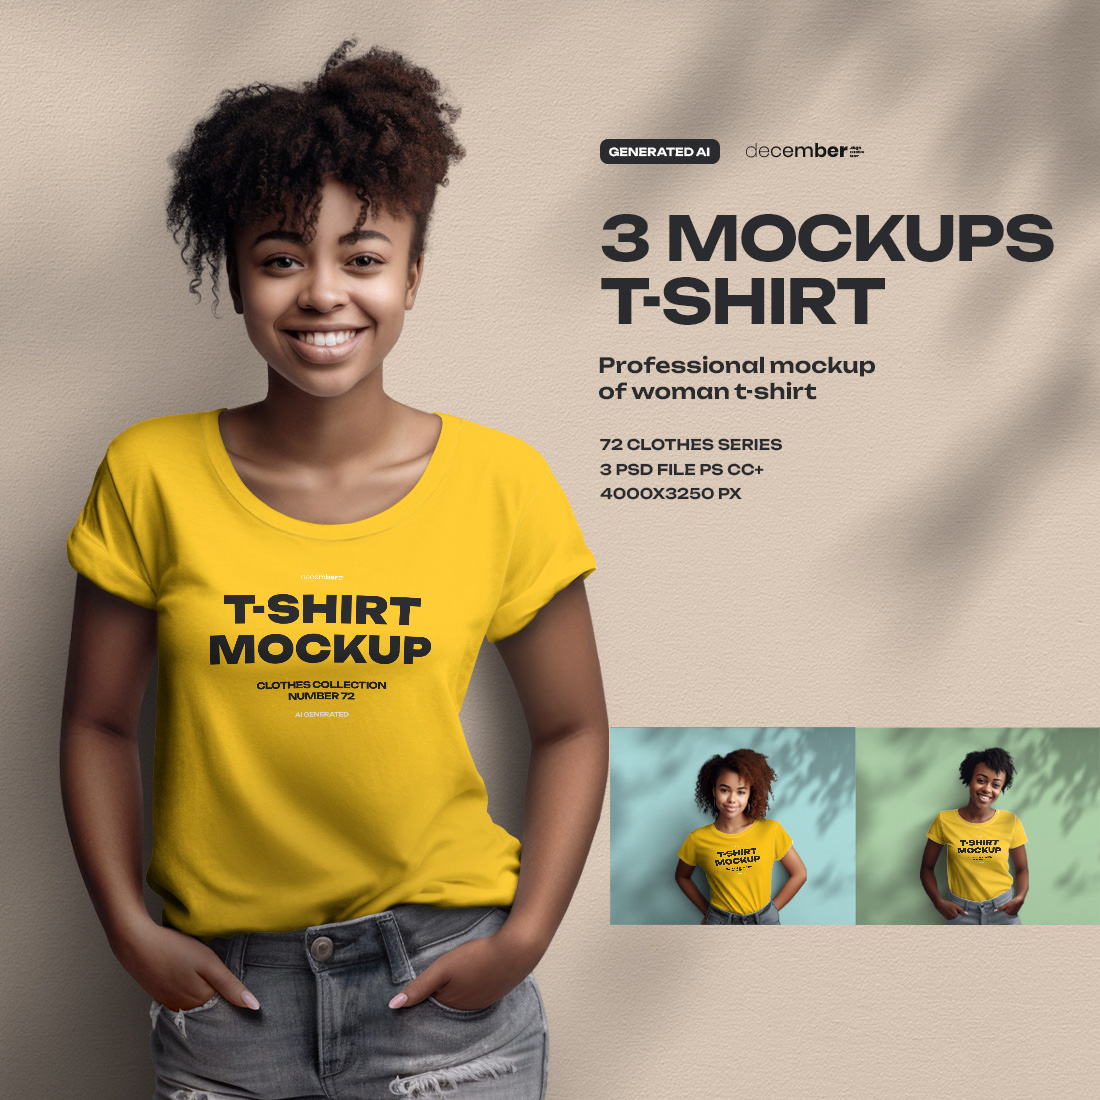 T-shirt Mockups on 3 Different African American Women Generated AI cover image.